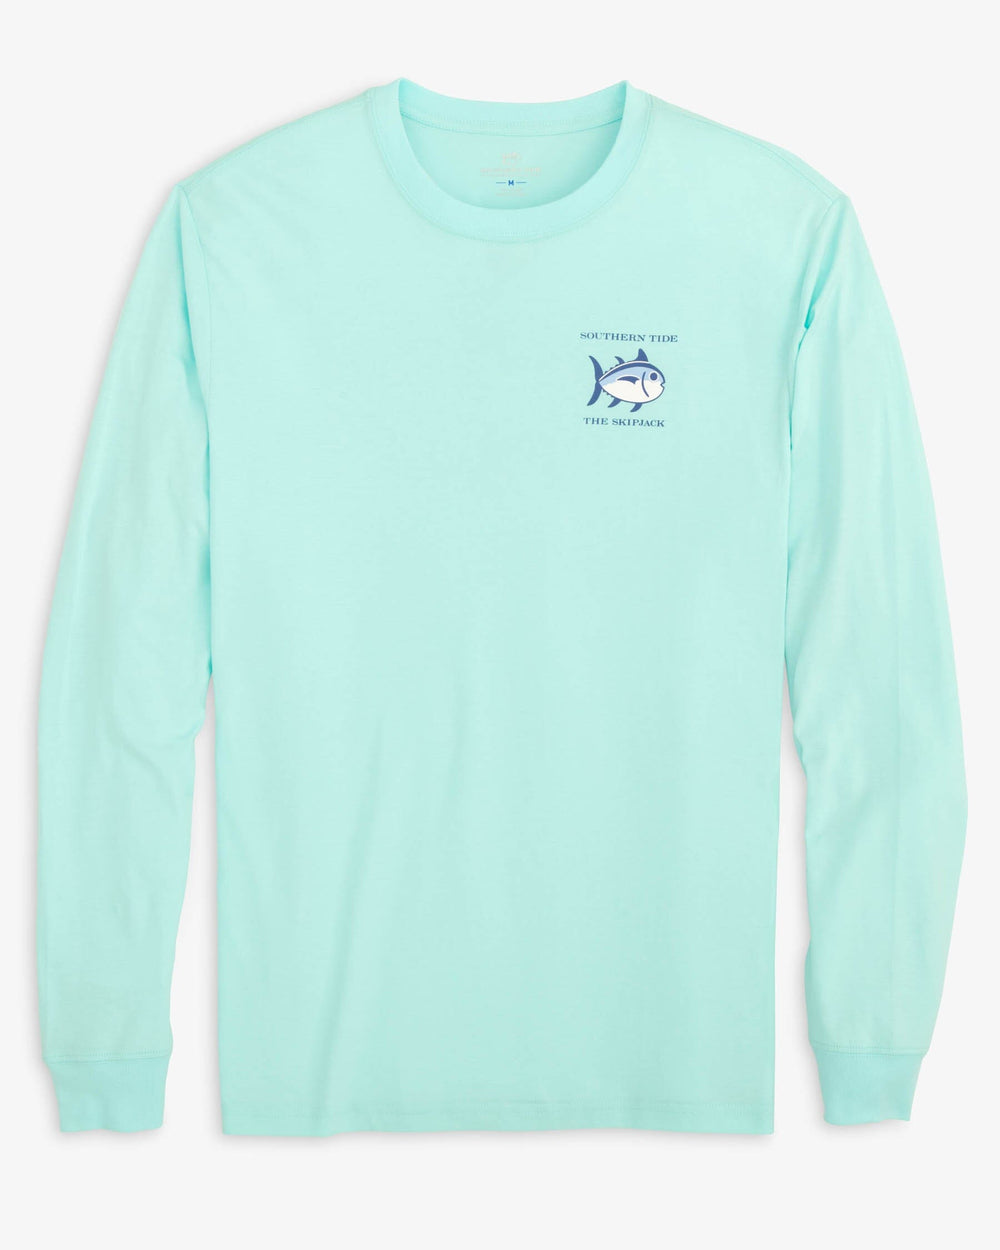 The front view of the Southern Tide Long Sleeve Original Skipjack T-Shirt by Southern Tide - Baltic Teal